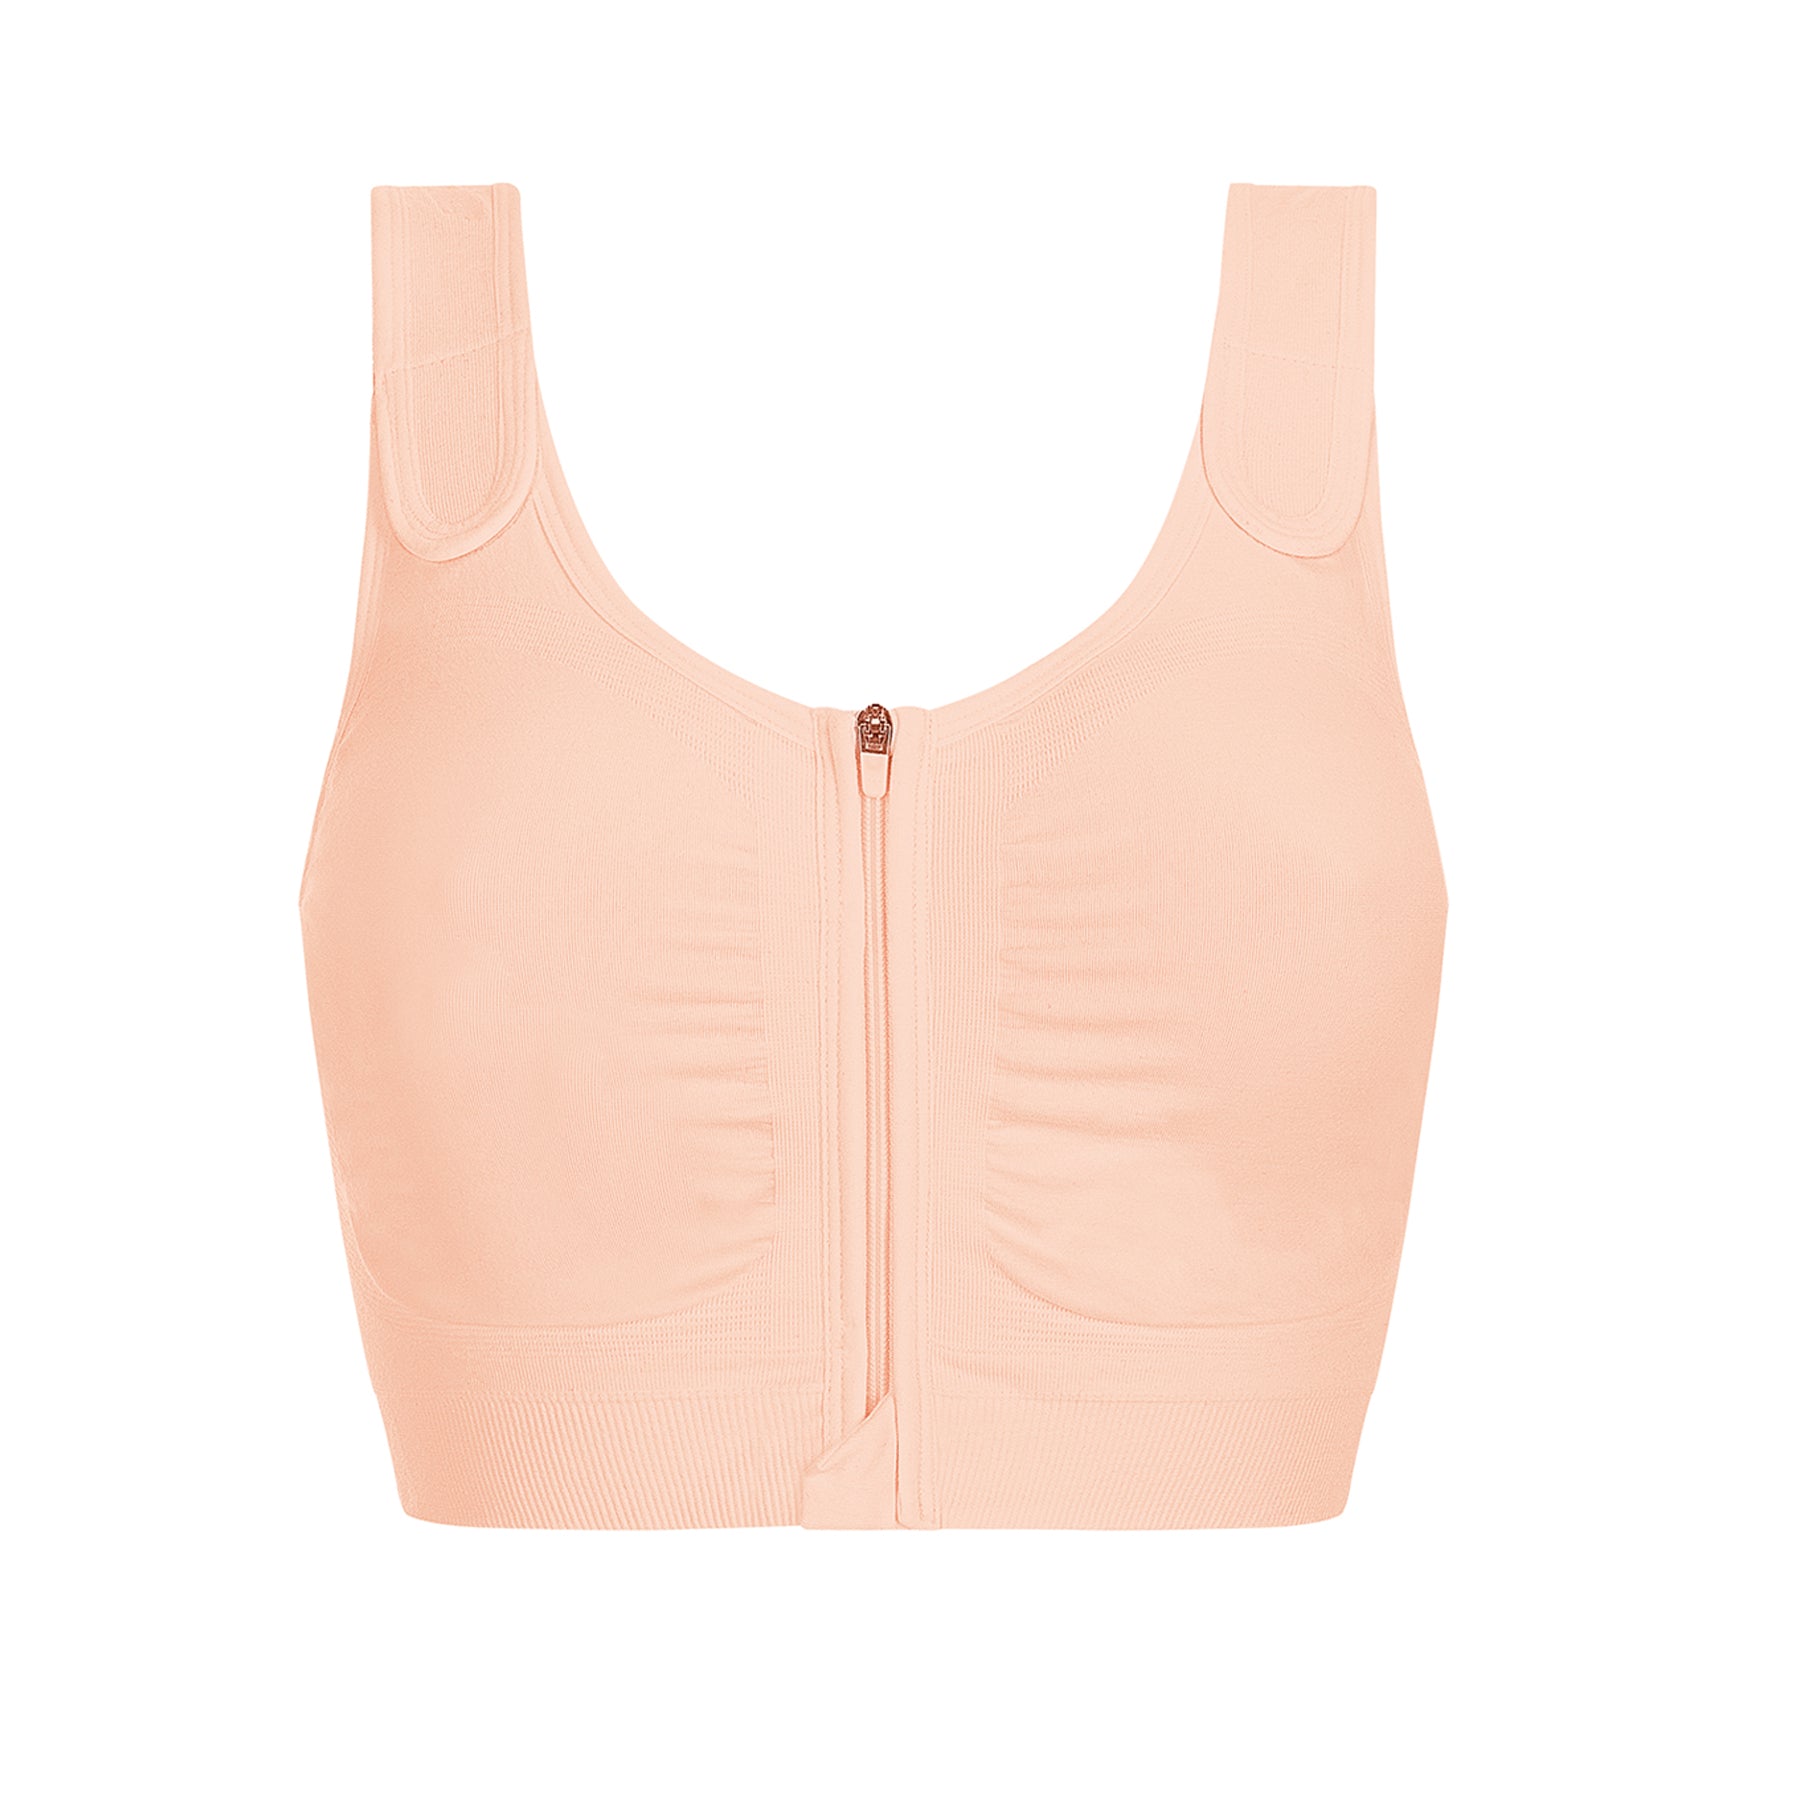 Leyla Seamless Post Surgical Bra Front Zipper - by Amoena – Pink